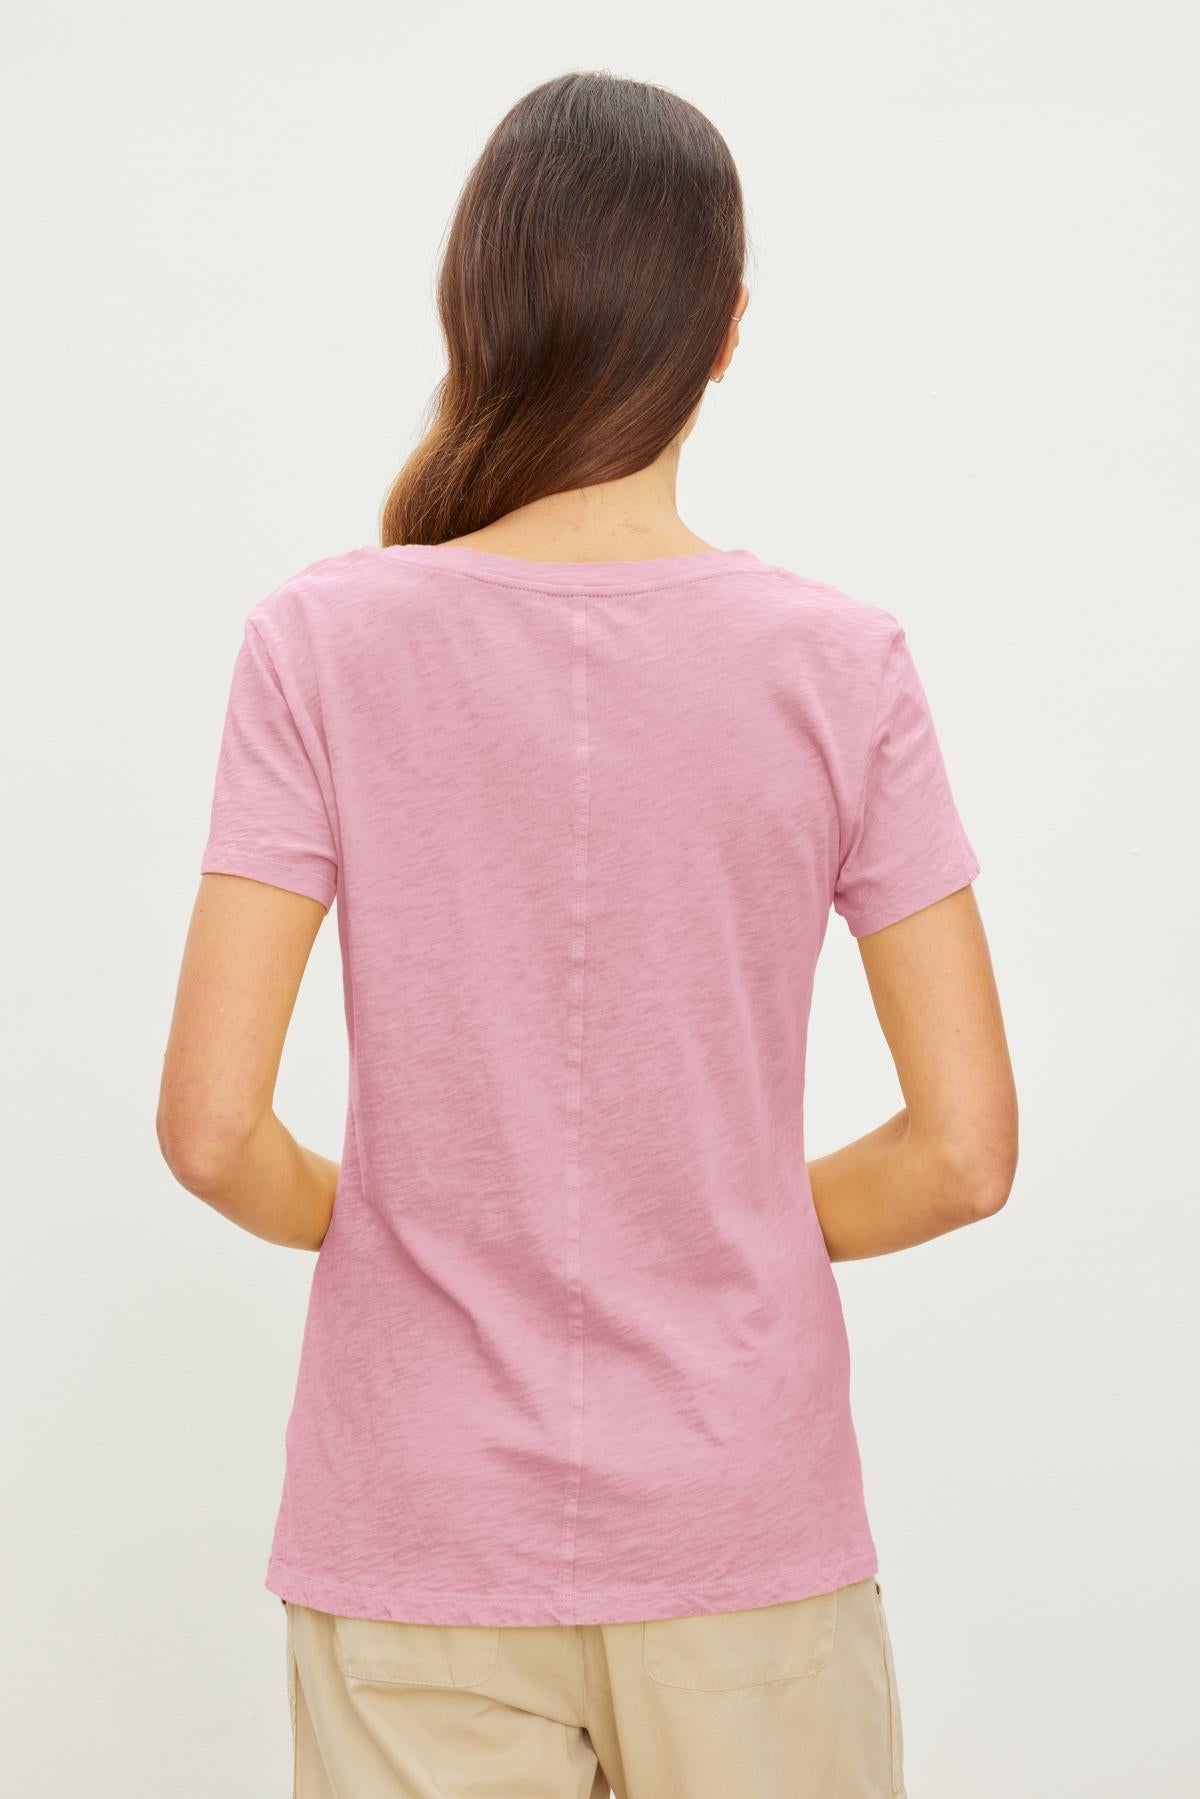   A person with long brown hair stands facing away, wearing a pink Velvet by Graham & Spencer LILITH TEE known for its luxurious softness and beige pants against a plain white background. 